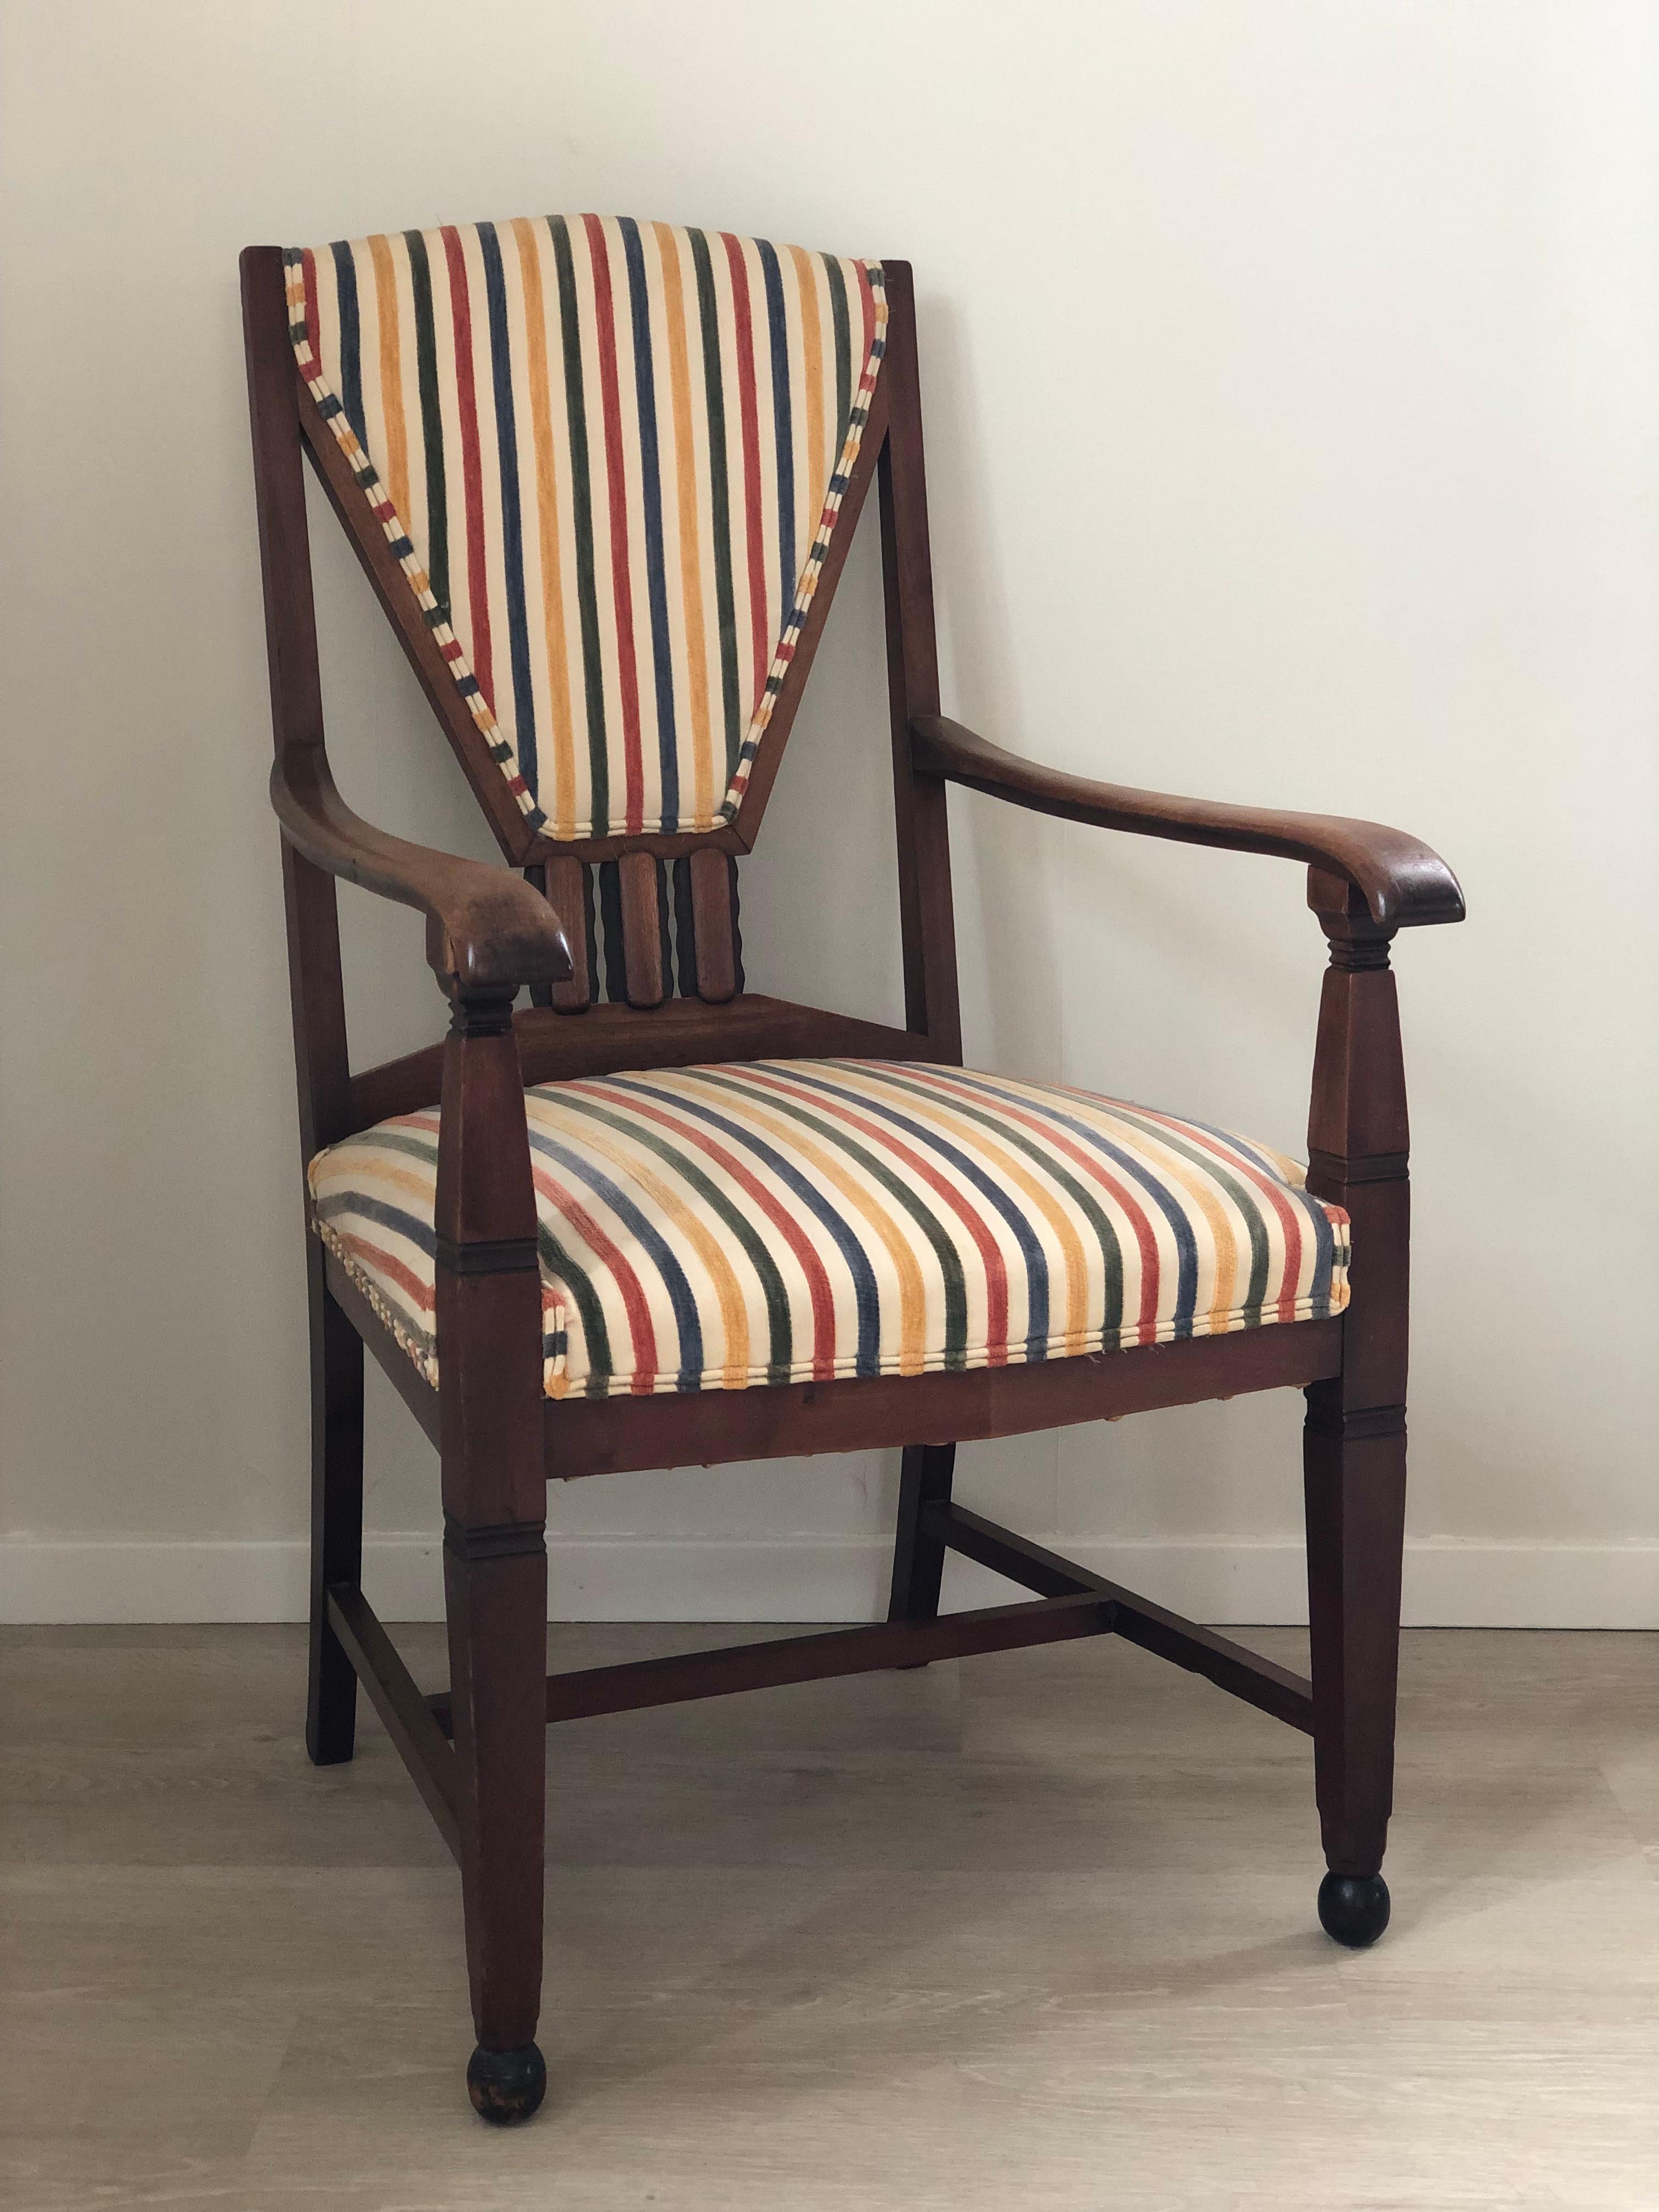 A unique Art Deco set of Amsterdam school armchairs of high quality craftsmanship from the Netherlands, 1930s. The large armchairs were designed and made by furniture manufacturer 't Woonhuys from Amsterdam. Detailed chairs with unique shapes in